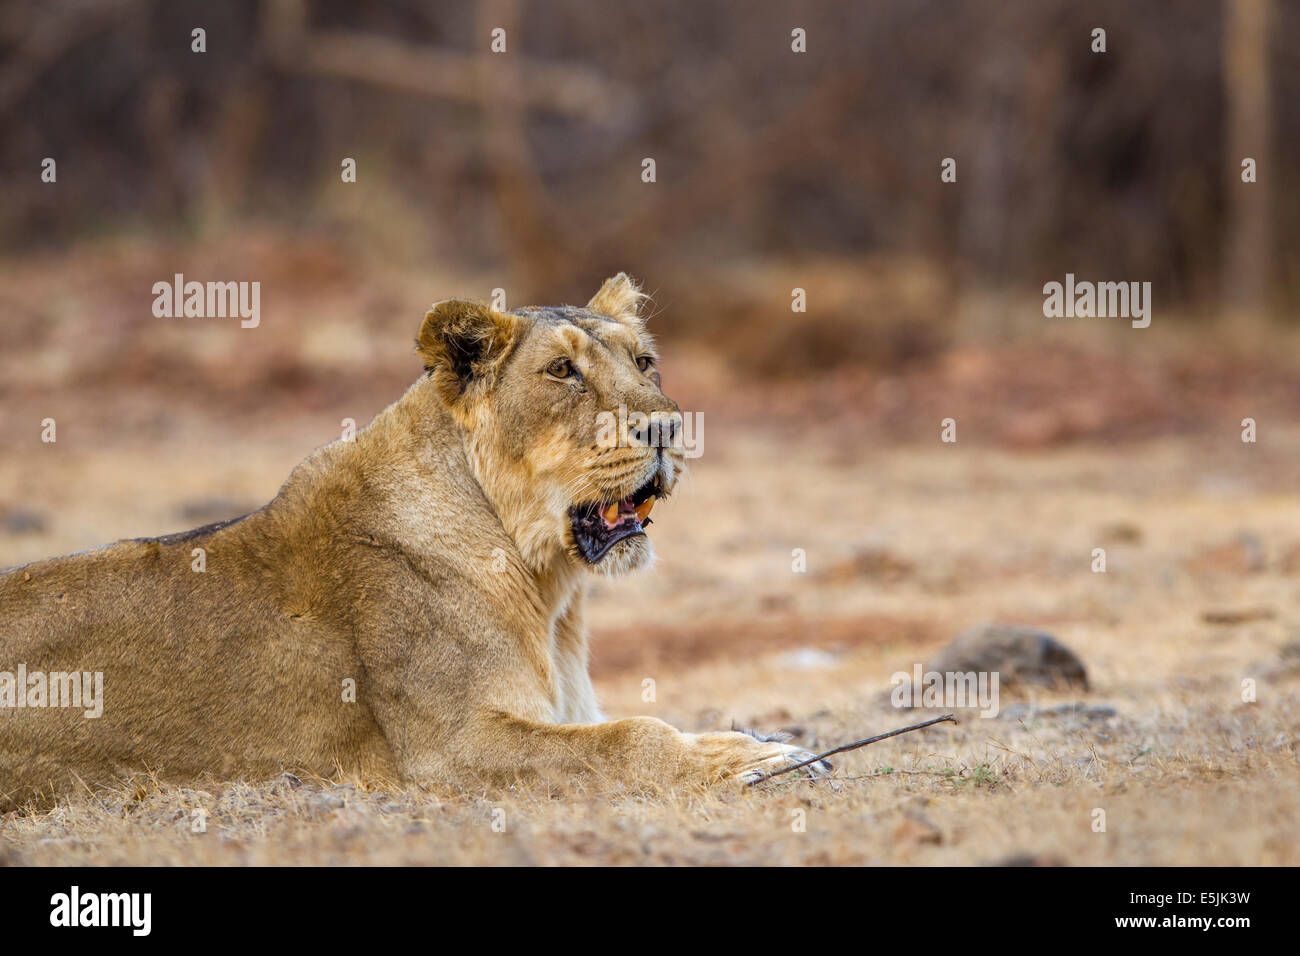 Asiatic Lioness (Panthera leo persica) at Gir forest, Gujarat India. Stock Photo